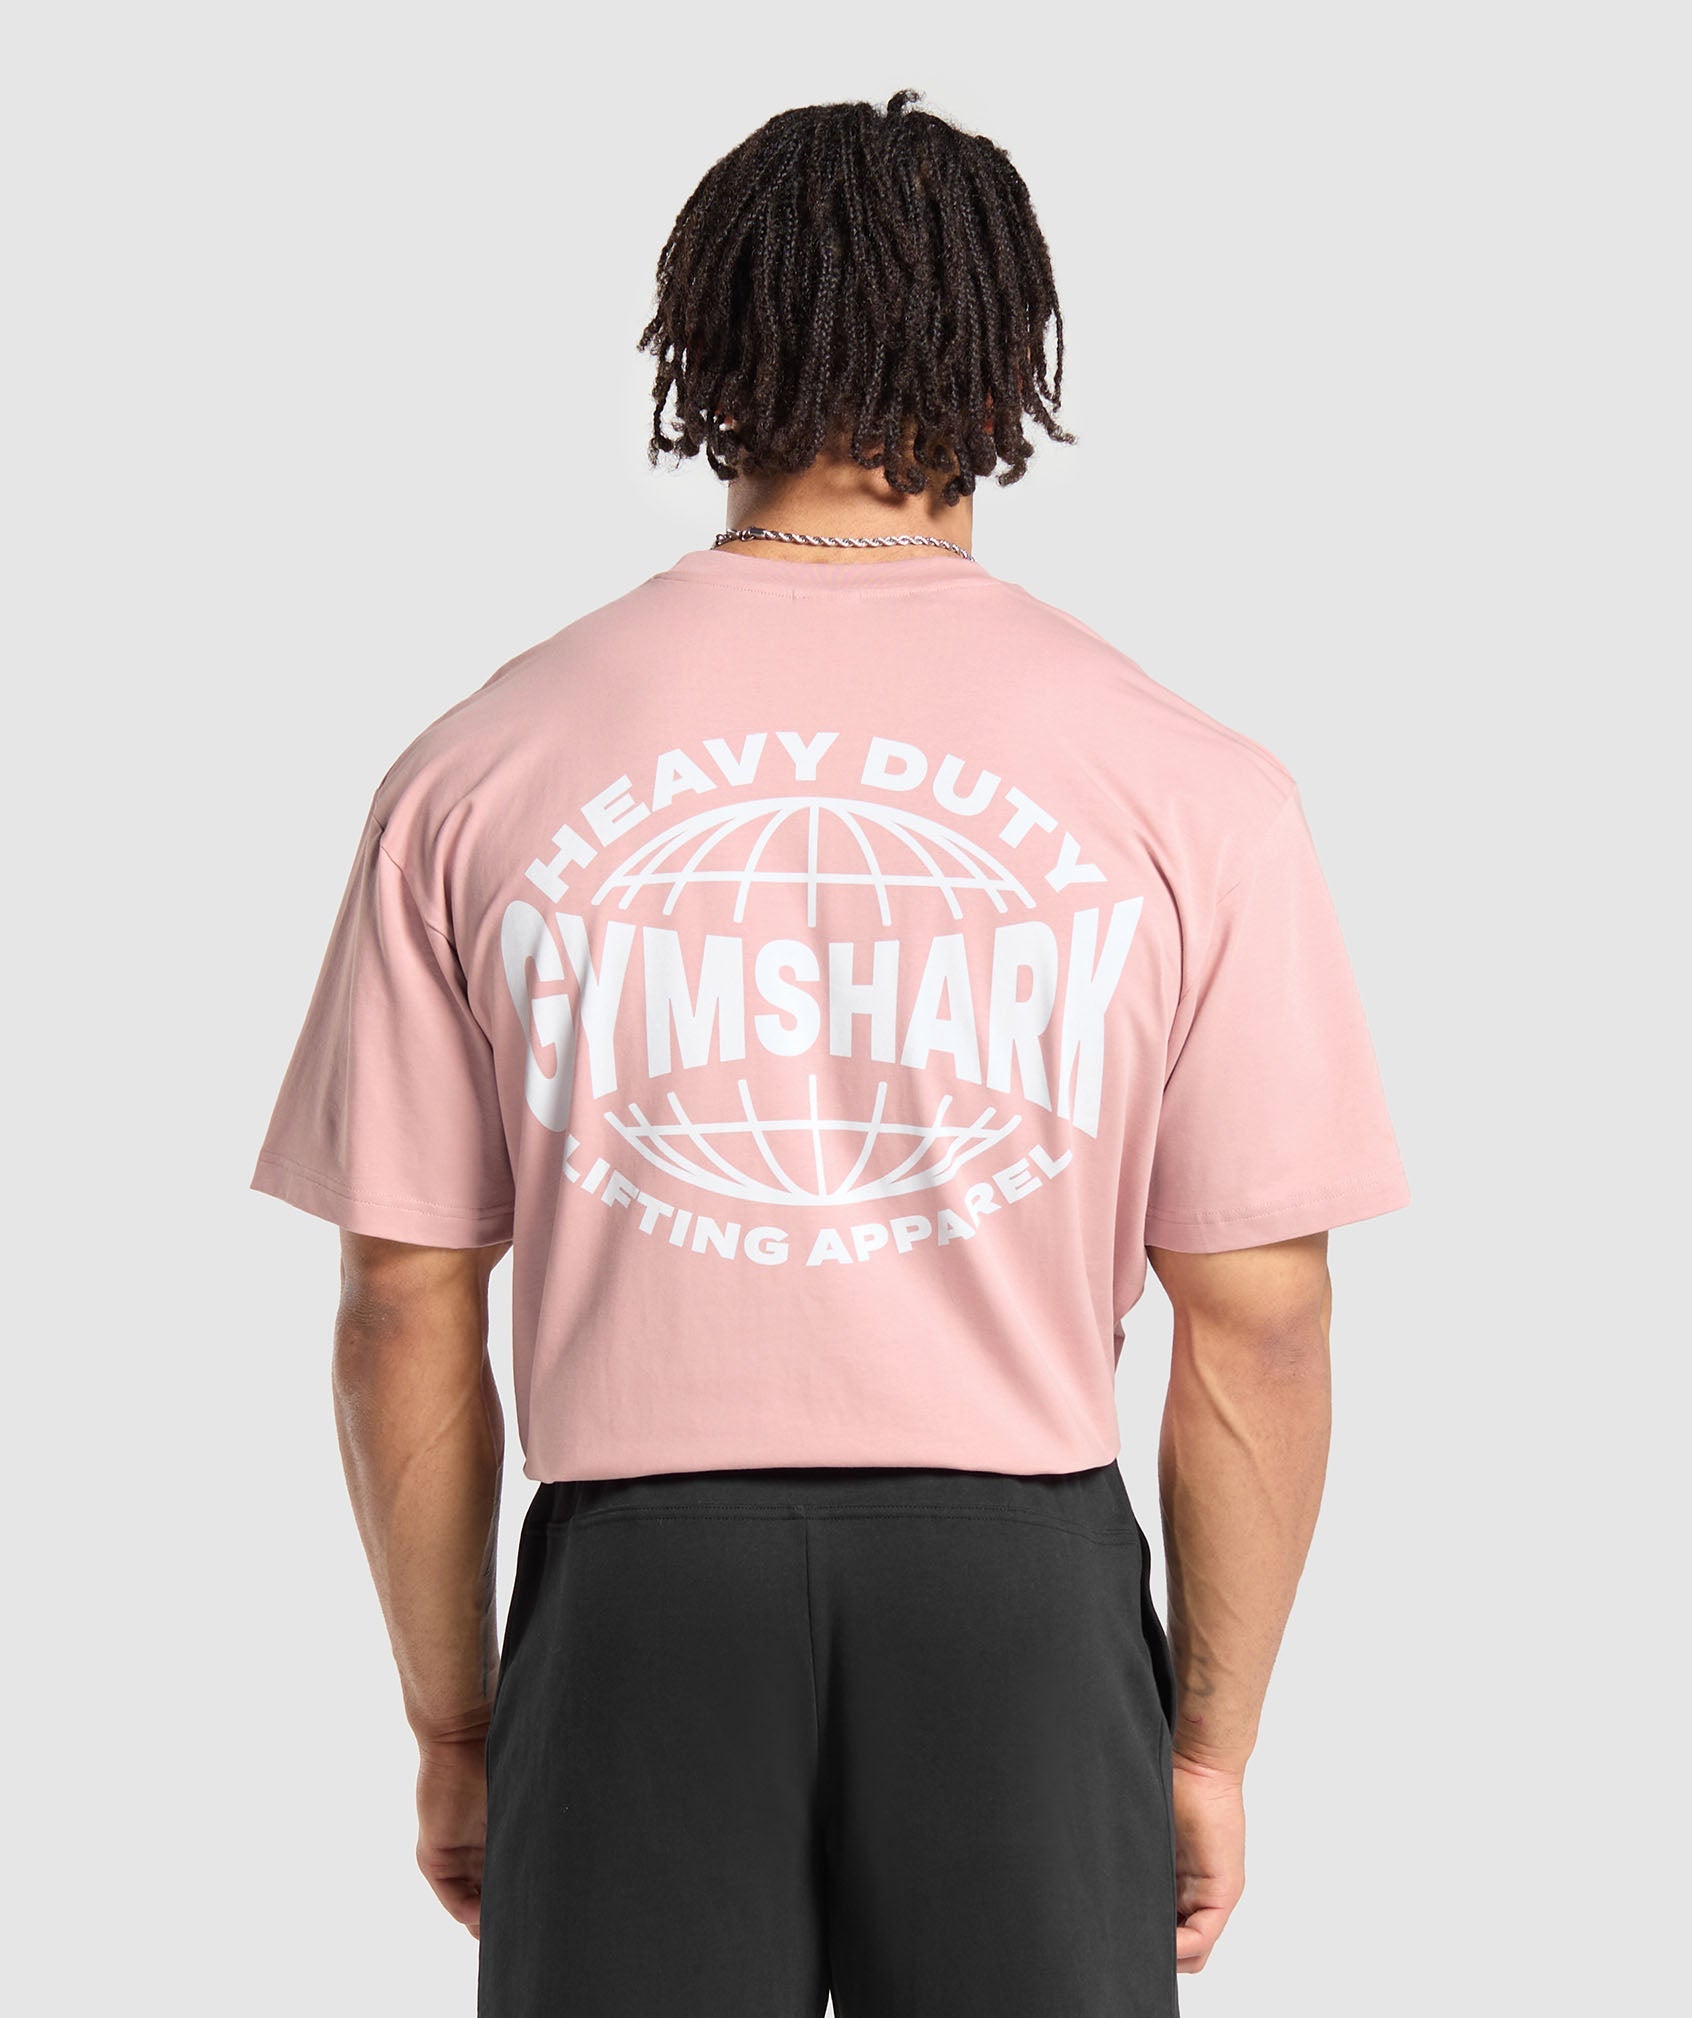 Heavy Duty Apparel T-Shirt in Light Pink - view 1